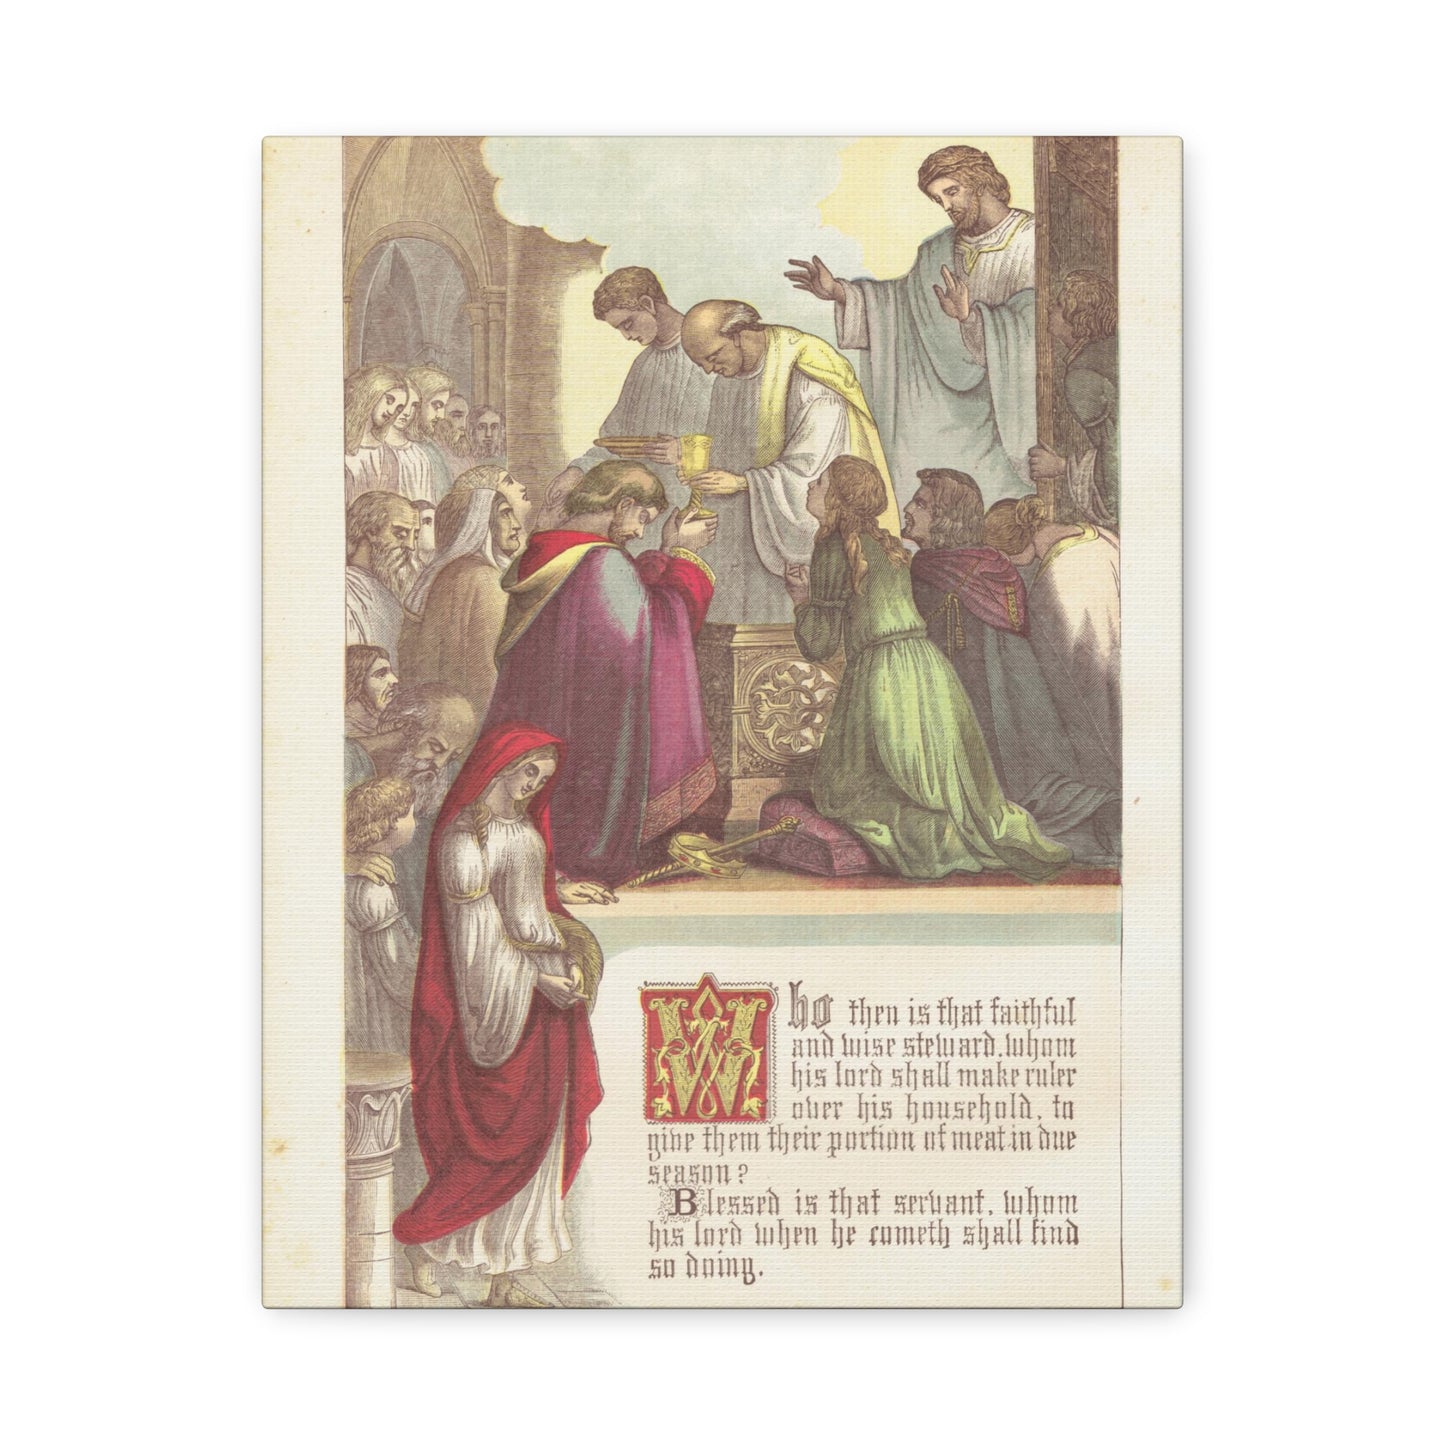 An 1885 religious illustration depicting a scene of a group of people, dressed in traditional biblical attire, witnessing a male figure gesturing towards a fiery altar, representing the biblical parable of the faithful and wise steward.